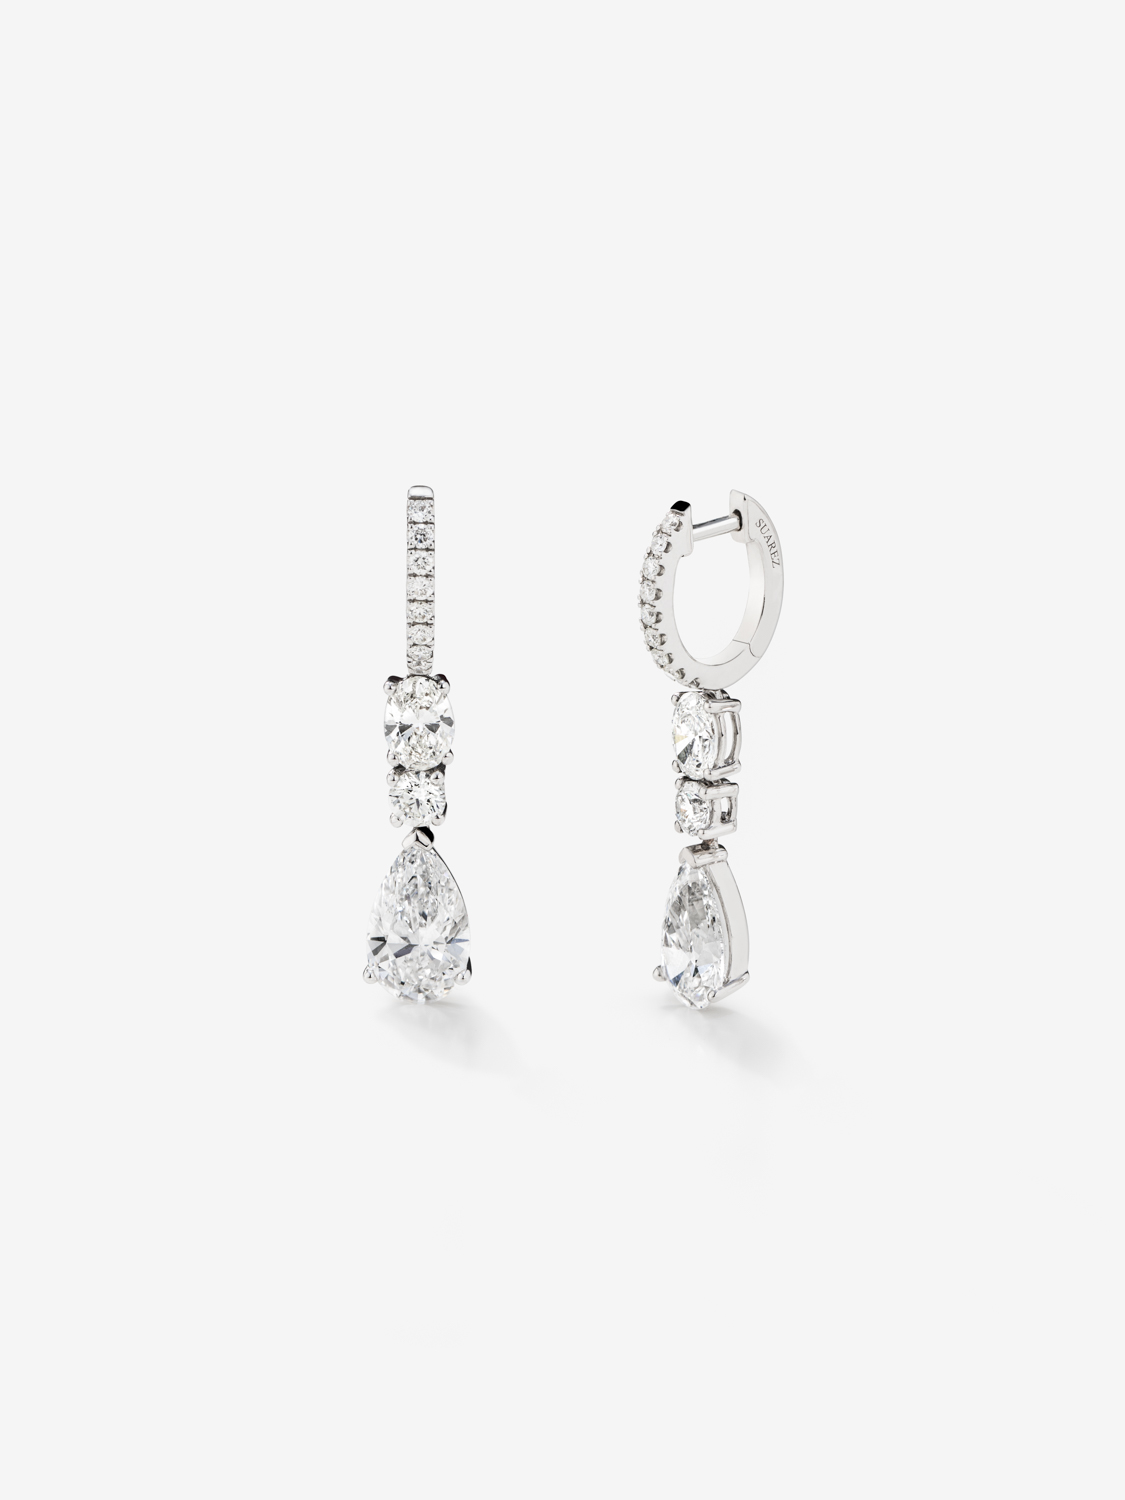 18K White Gold Solitaire Hanging Hoop Earrings with Diamonds